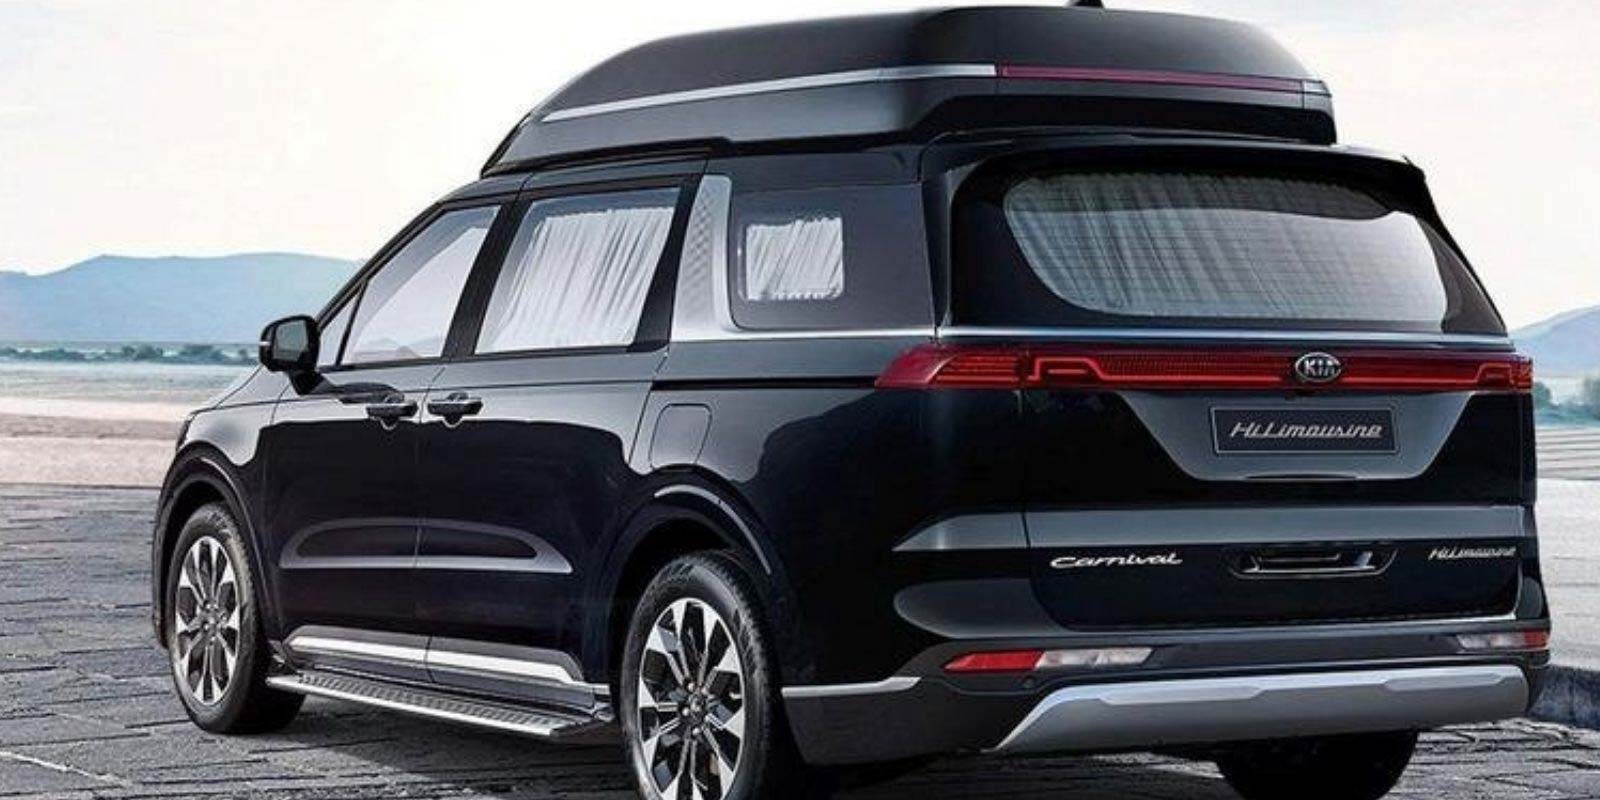 2021 Kia Carnival HiLimousine Variant Unveiled With Roof Box